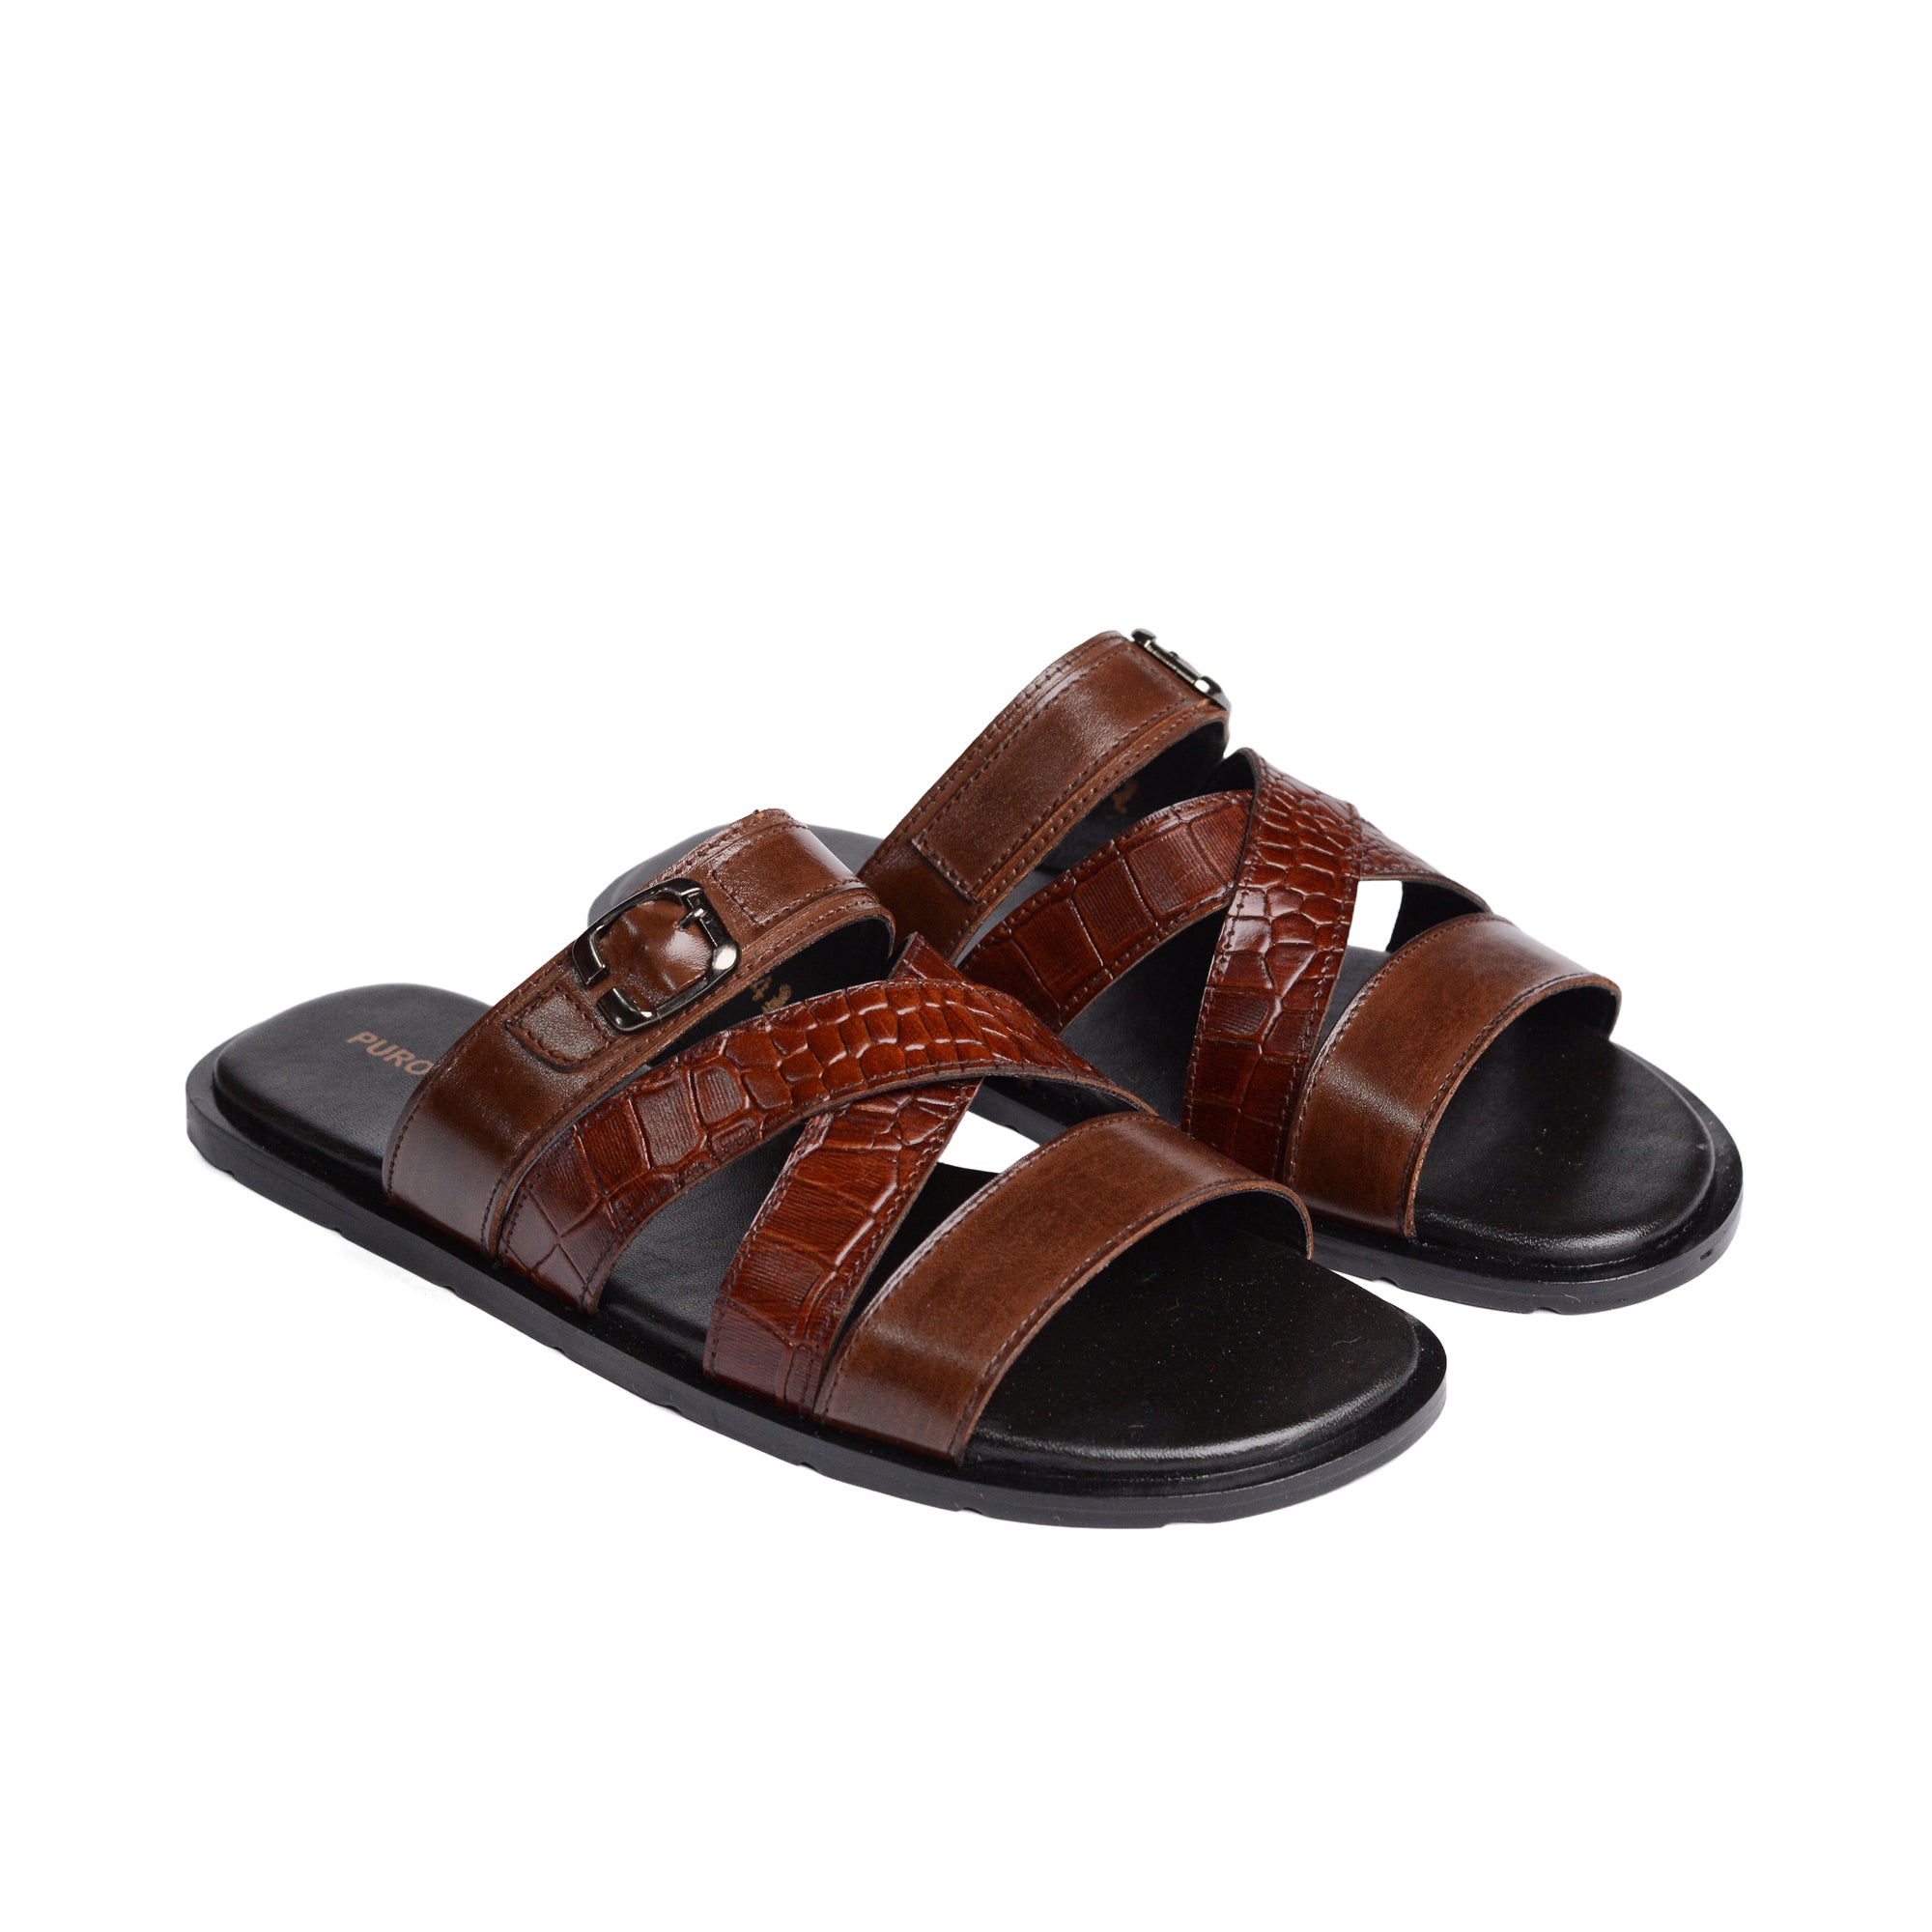 Brown Double Cross Strapped Slipper SA05